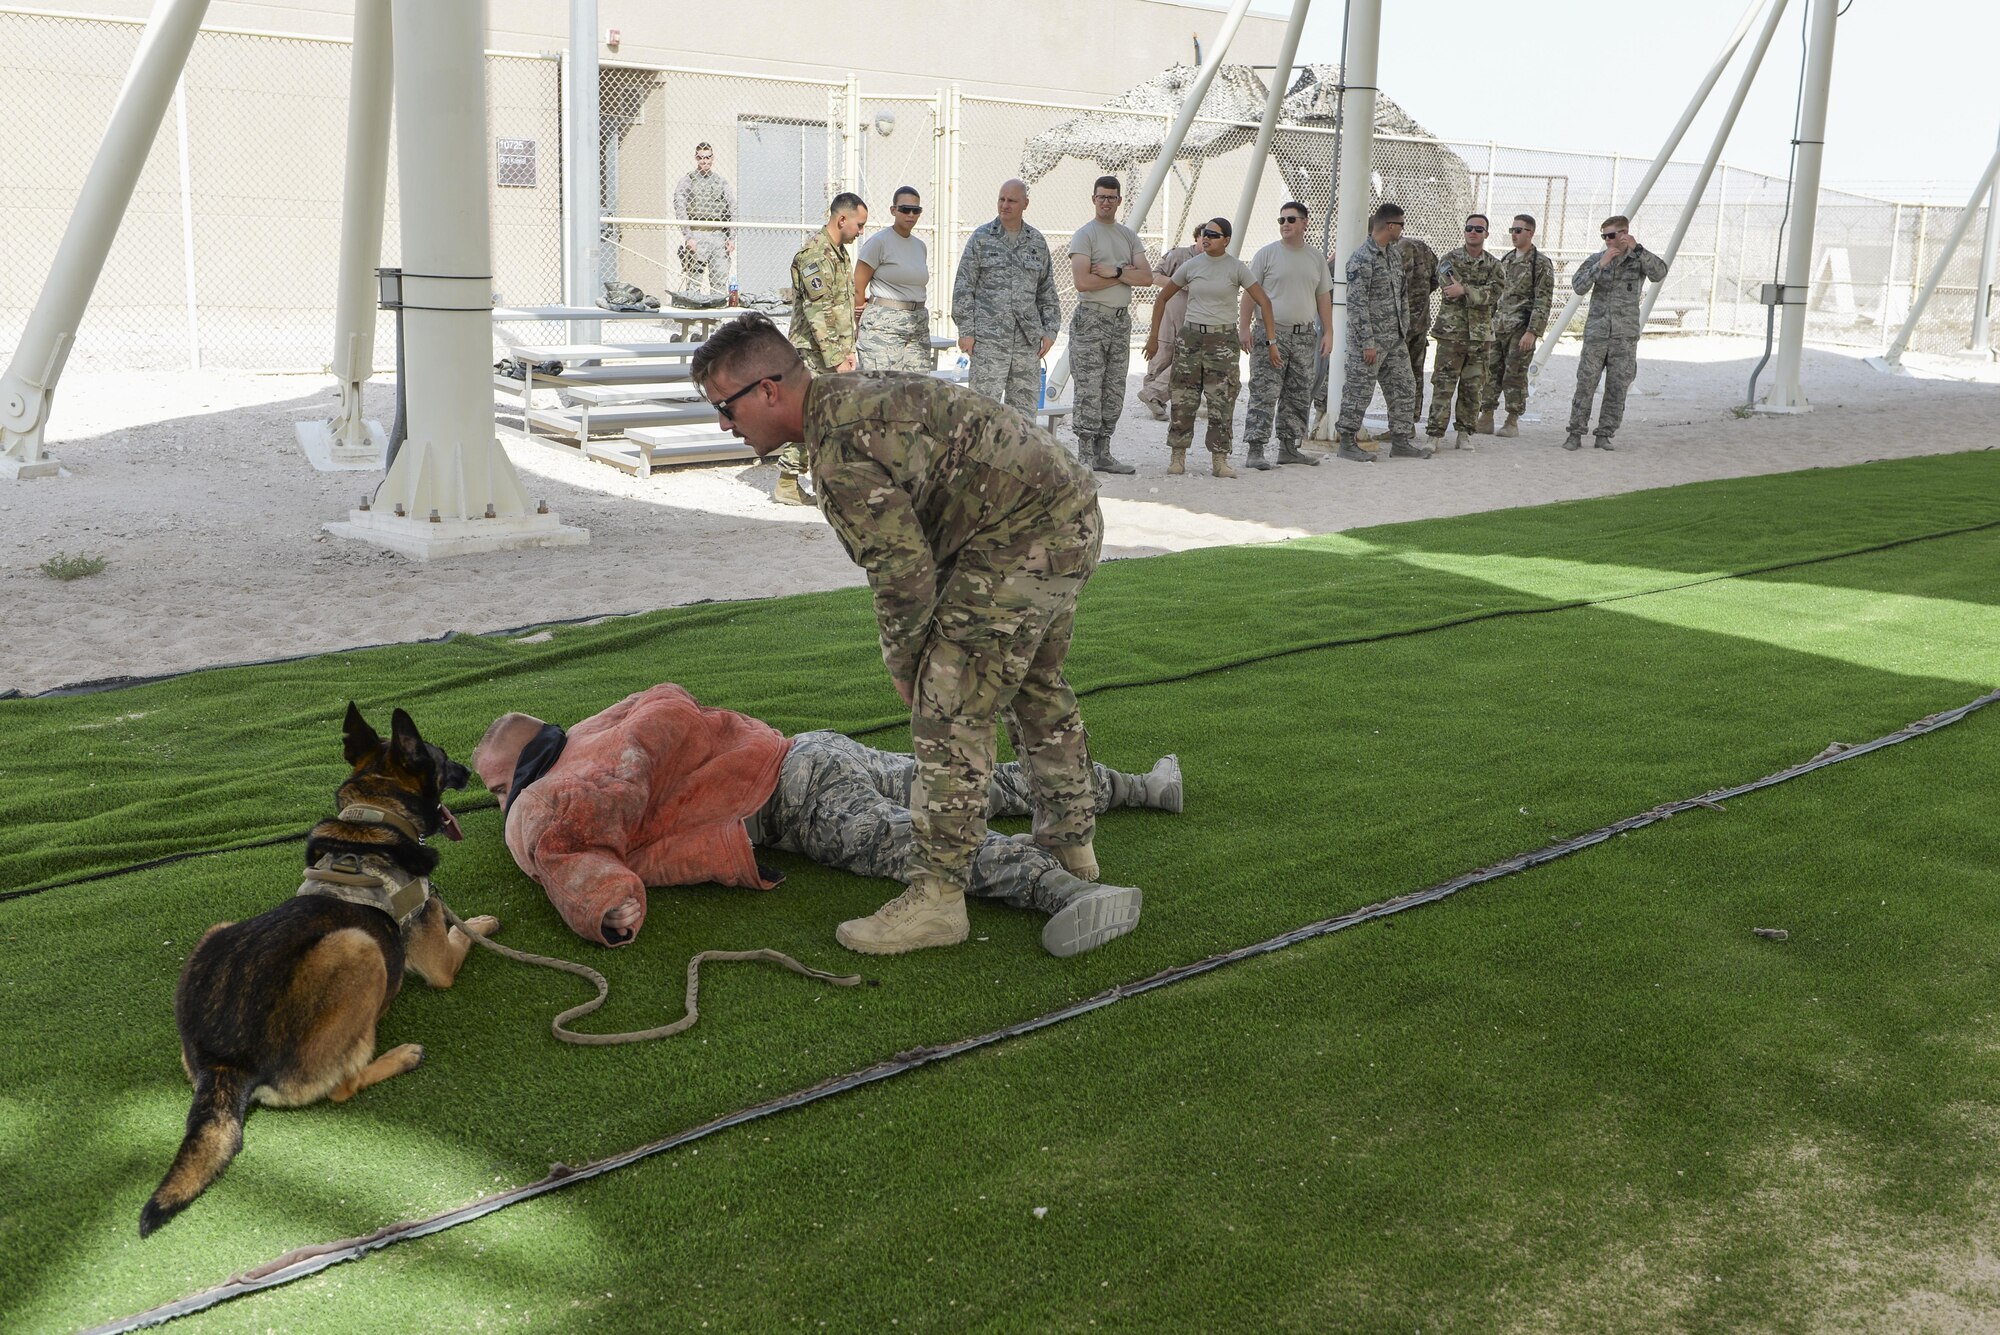 U.S. Air Force Senior Airman Louis Hurbis lays on the ground as fellow 379th Expeditionary Security Forces Squadron military working dog handler, Staff Sgt. Brandon Stone, stands over him while military working dog Hugo looks on after detaining the “suspect” and bringing him to the ground during a K-9 demonstration exercise at Al Udeid Air Base, Qatar, Aug. 17, 2017.